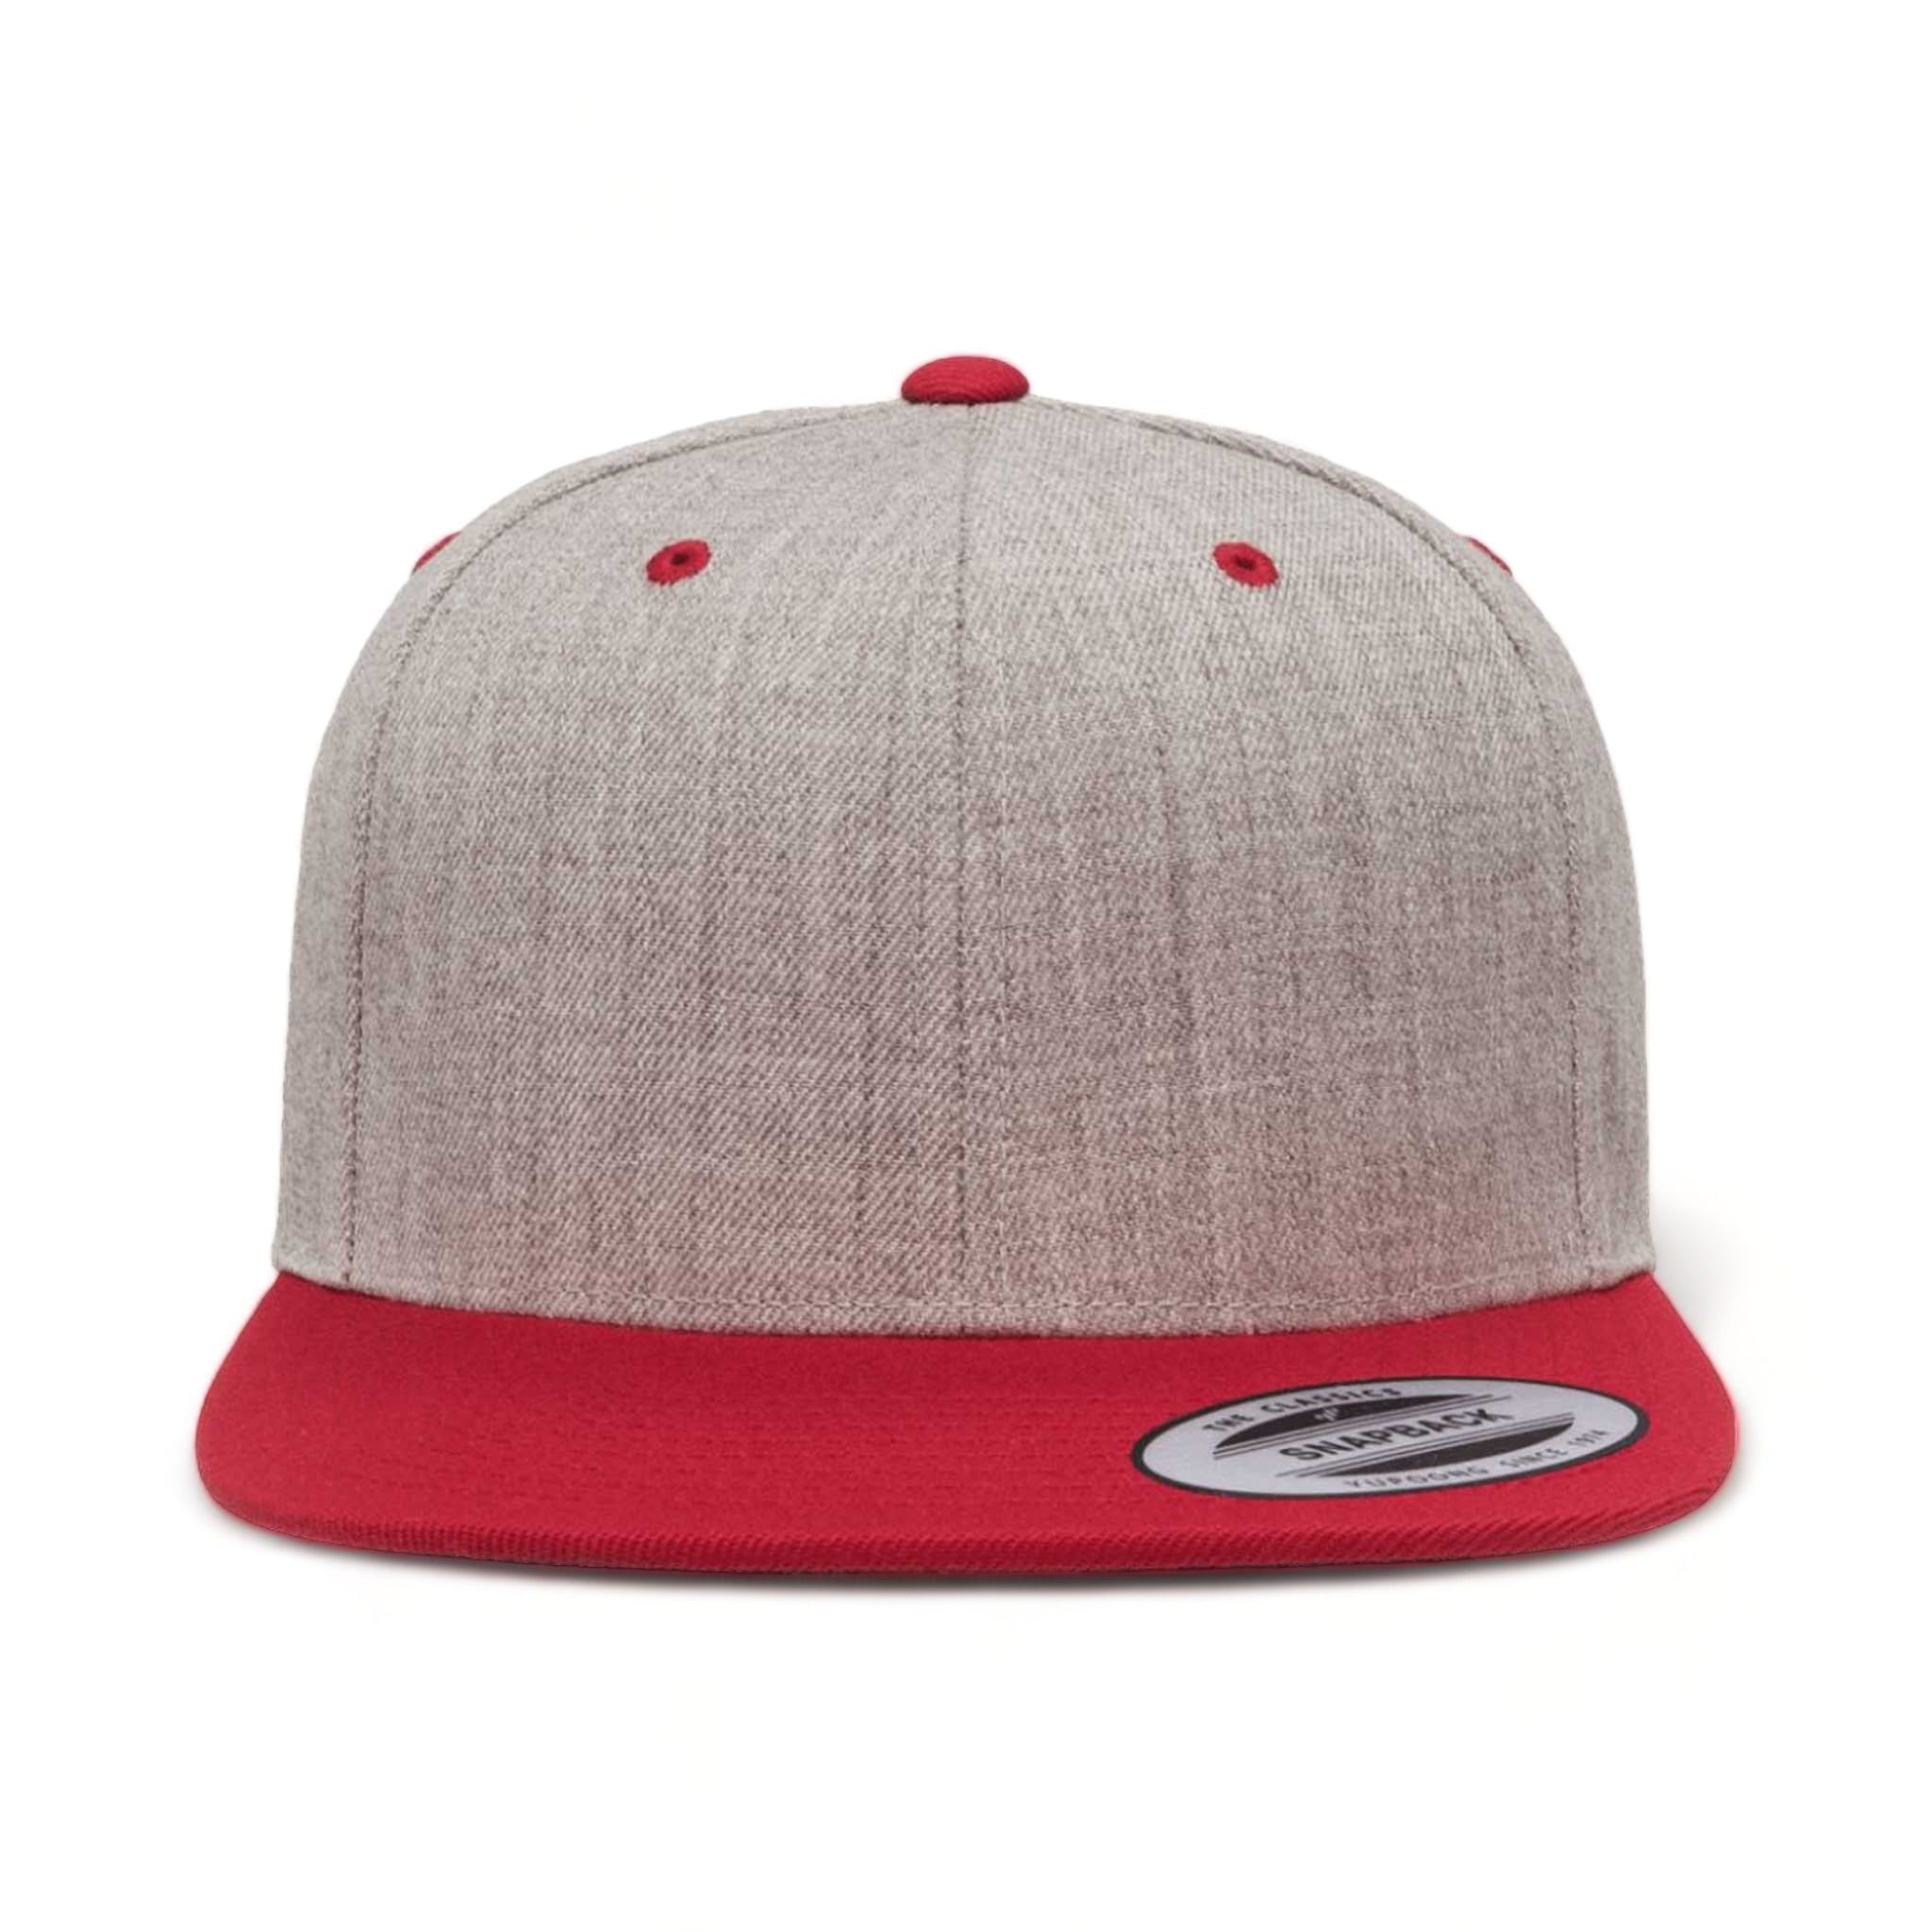 Front view of YP Classics 6089M custom hat in heather grey and red